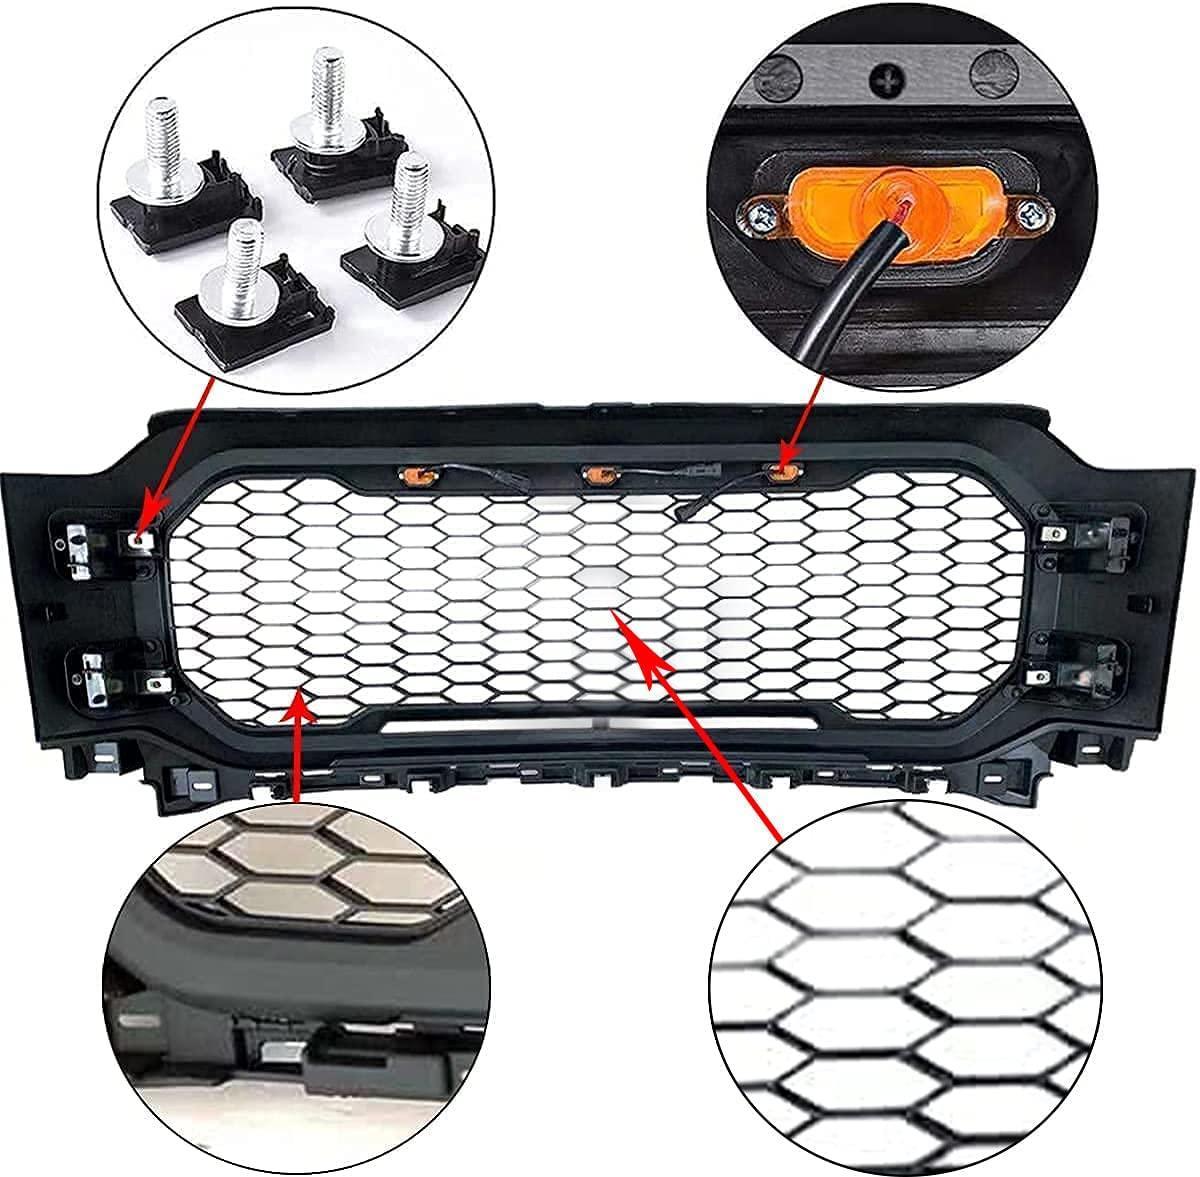 Grill For 2021-2022 Ford f150 Raptor Grill Replacement W/LED Lights & Letters Matte Black - Goodmatchup